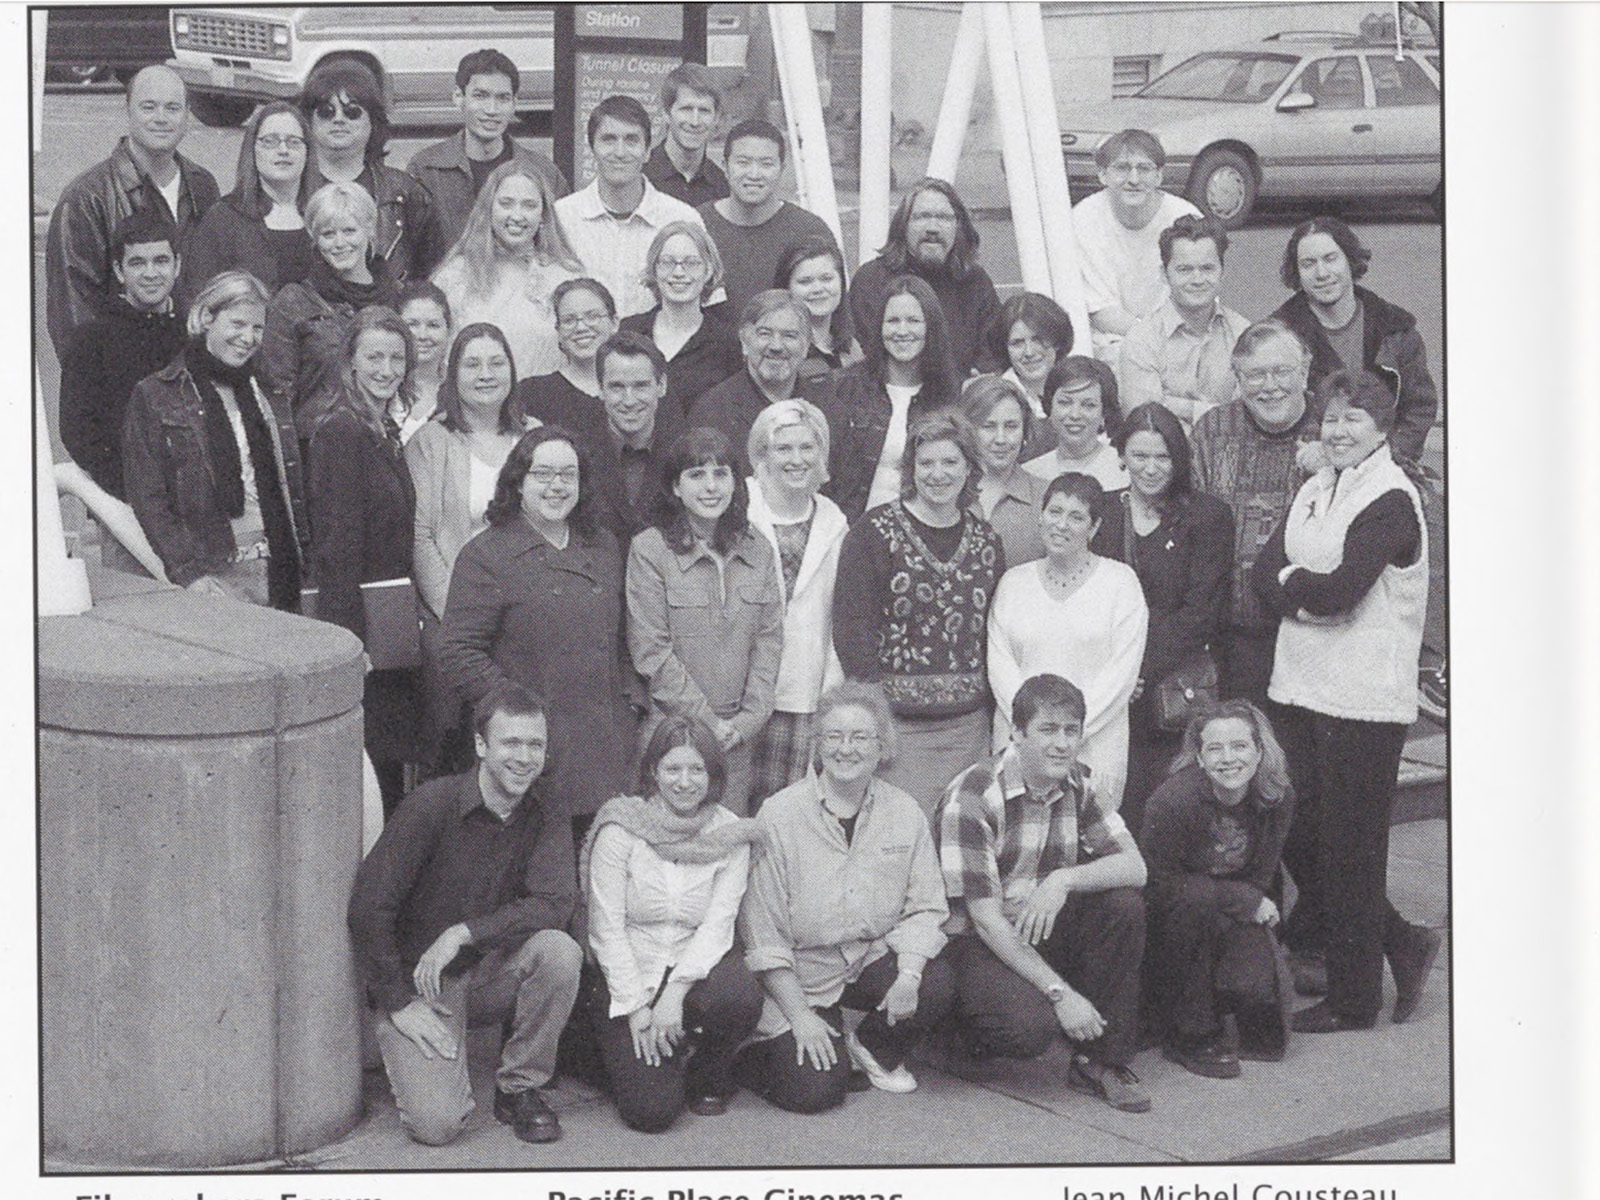 SIFF staff, including long-time programmers, Dan Doody (and a 2002 Print Traffic Manager), Maryna Ajaja, and Ruth Hayler, and festival founder, Darryl Macdonald